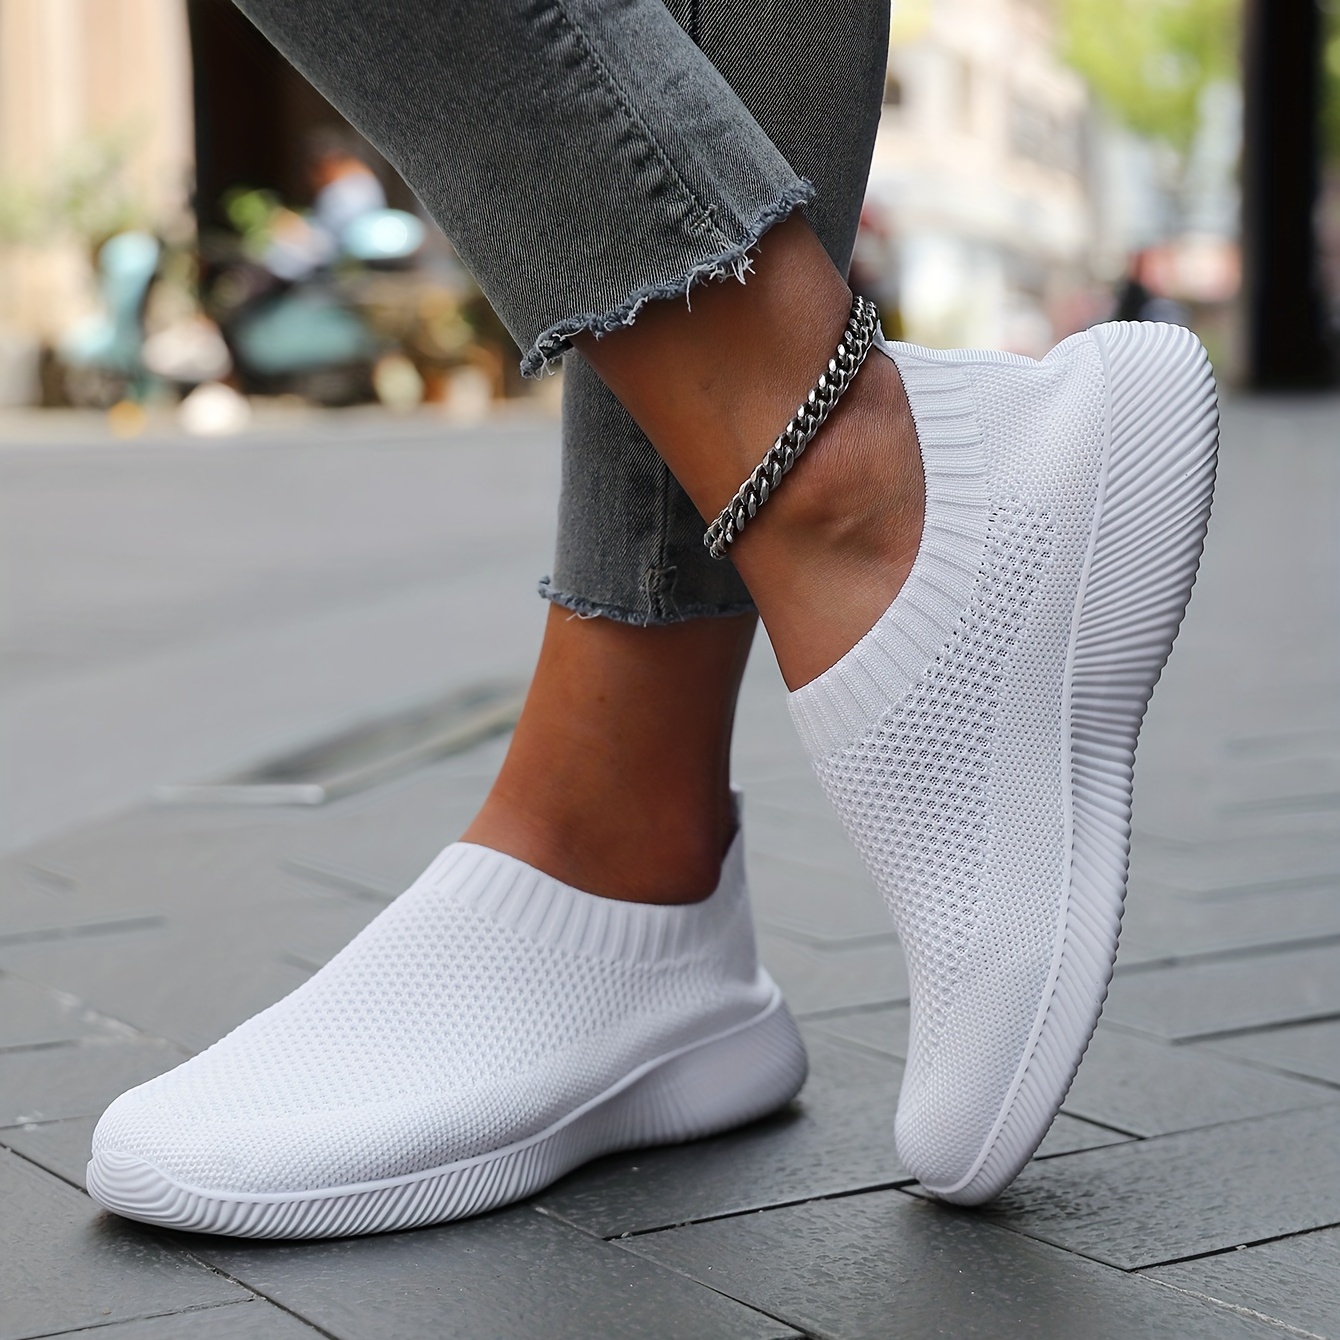 womens solid color flying woven sneakers casual breathable slip on outdoor shoes lightweight low top running shoes details 4